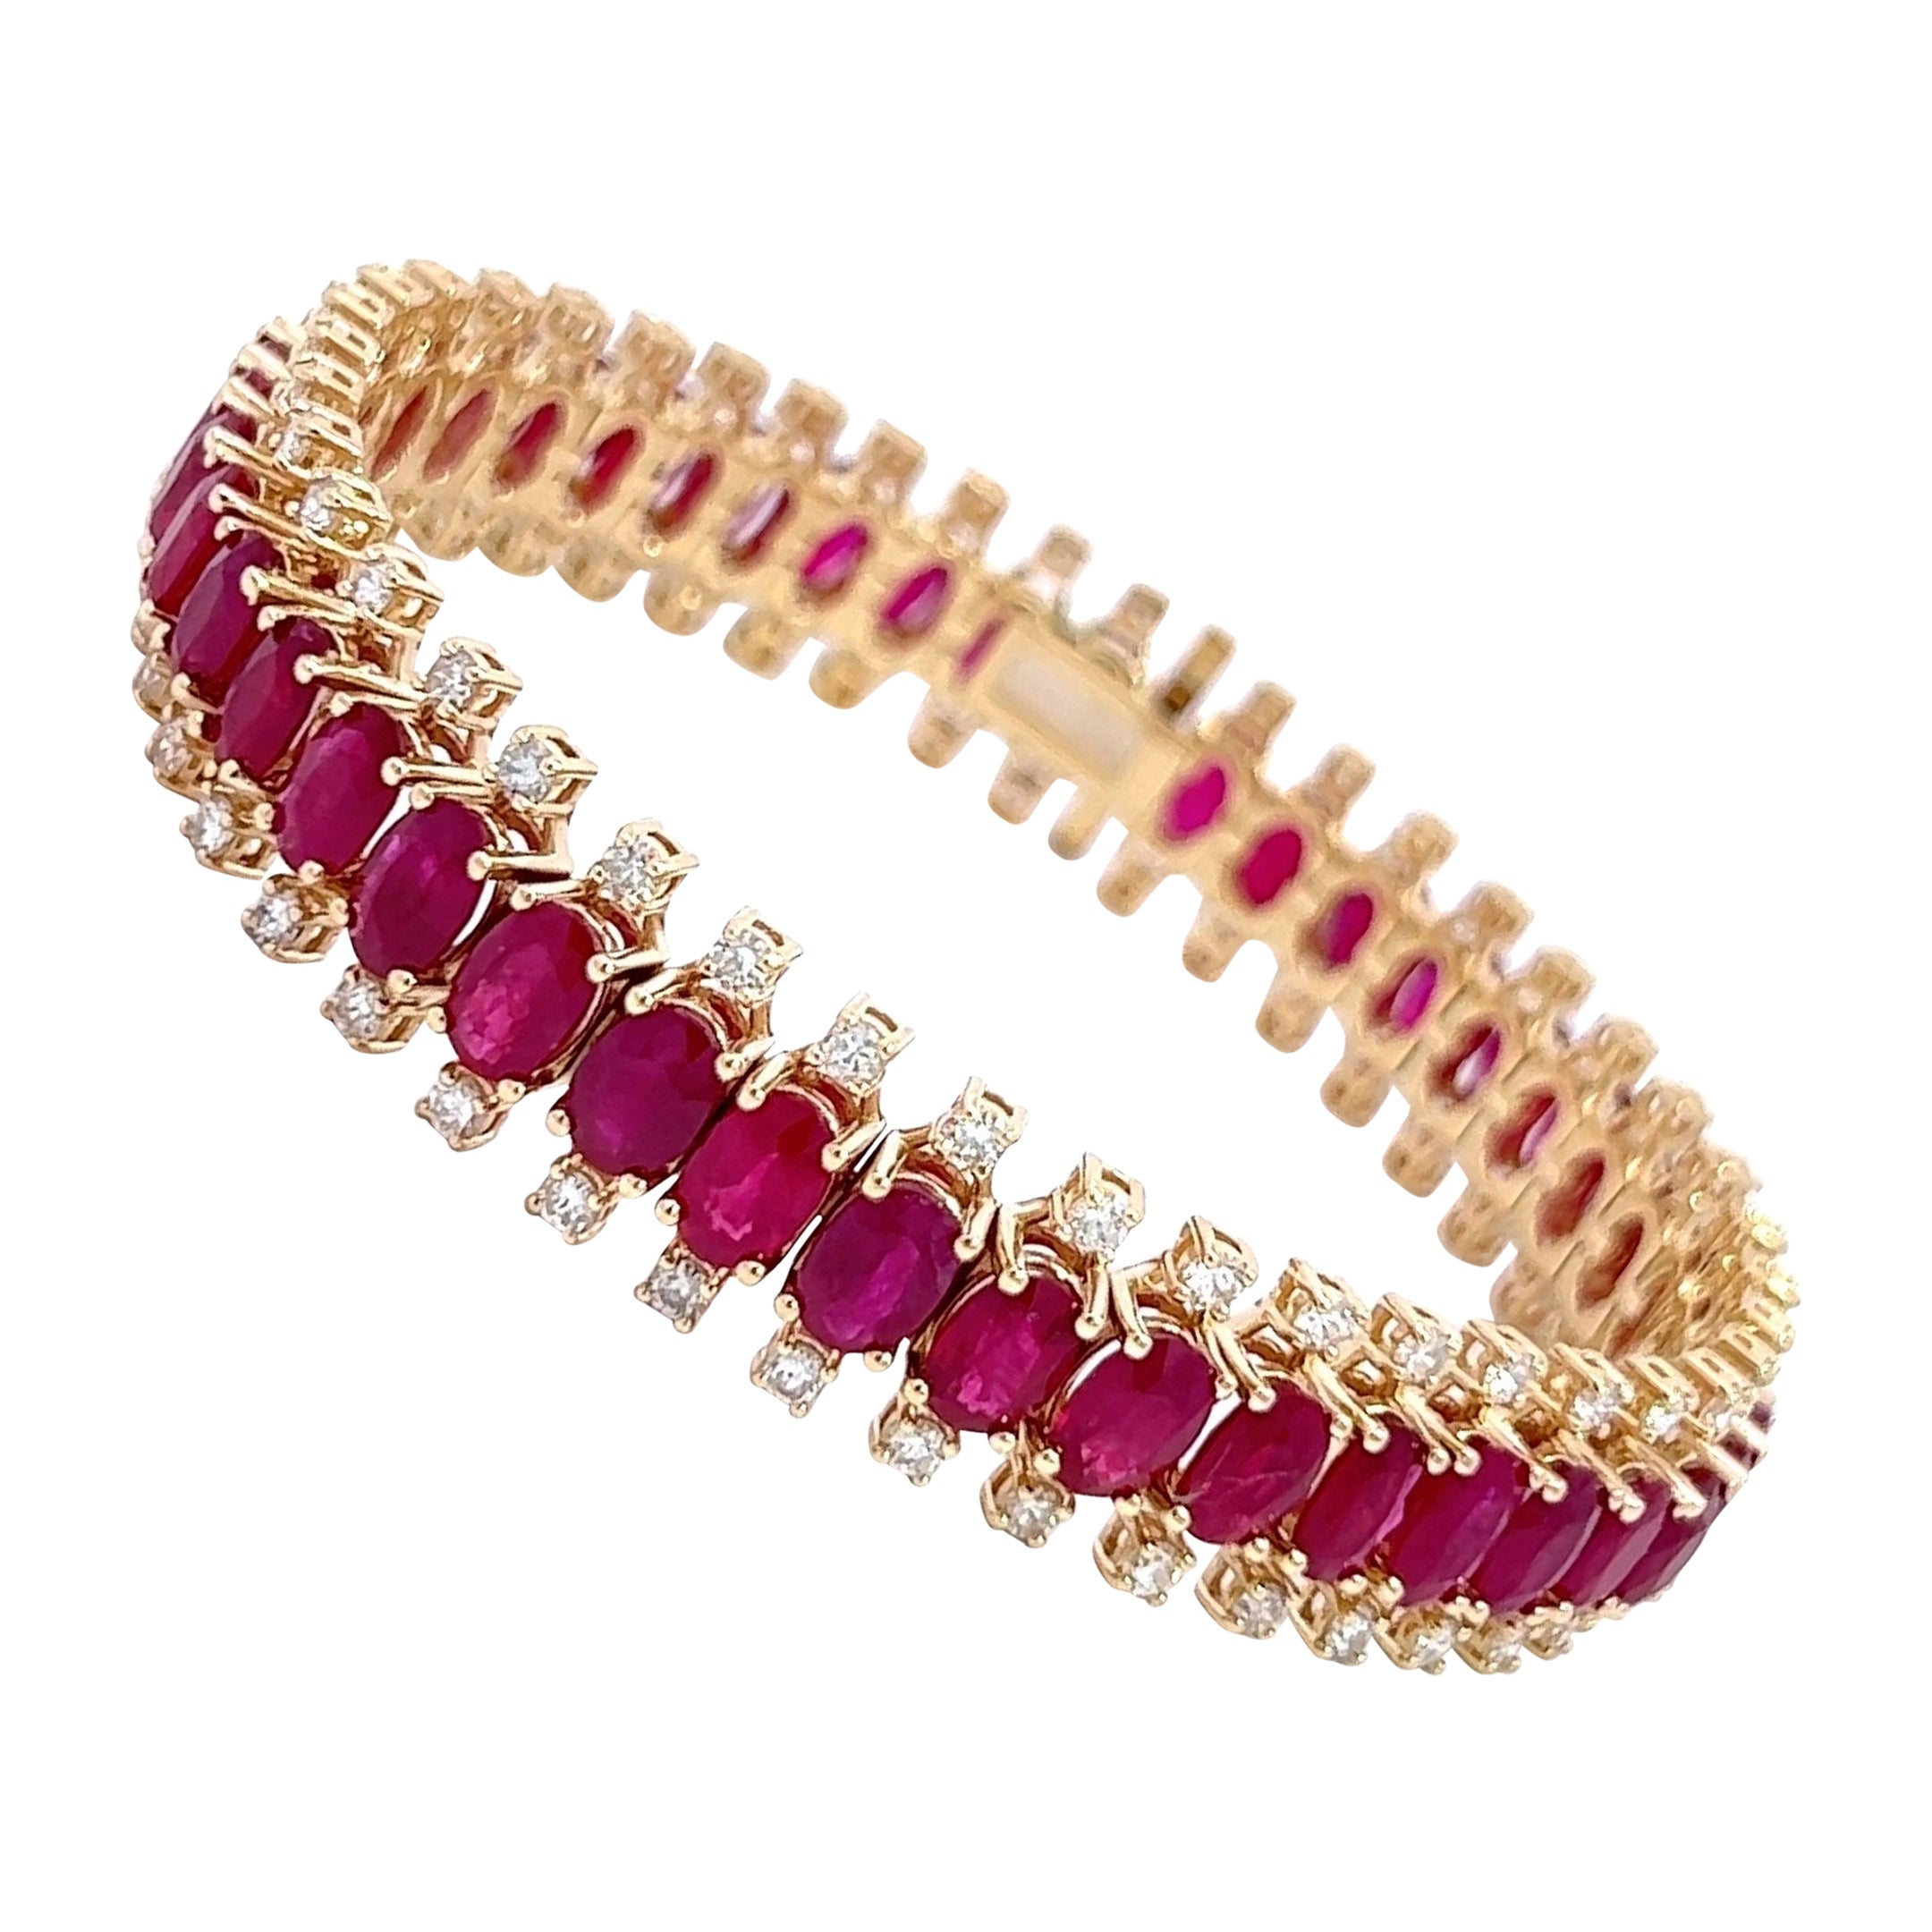 Diamonds & Rubies Bracelet, 18K Yellow, 3.02 CT Diam, 26.13 CT Ruby, All Natural For Sale